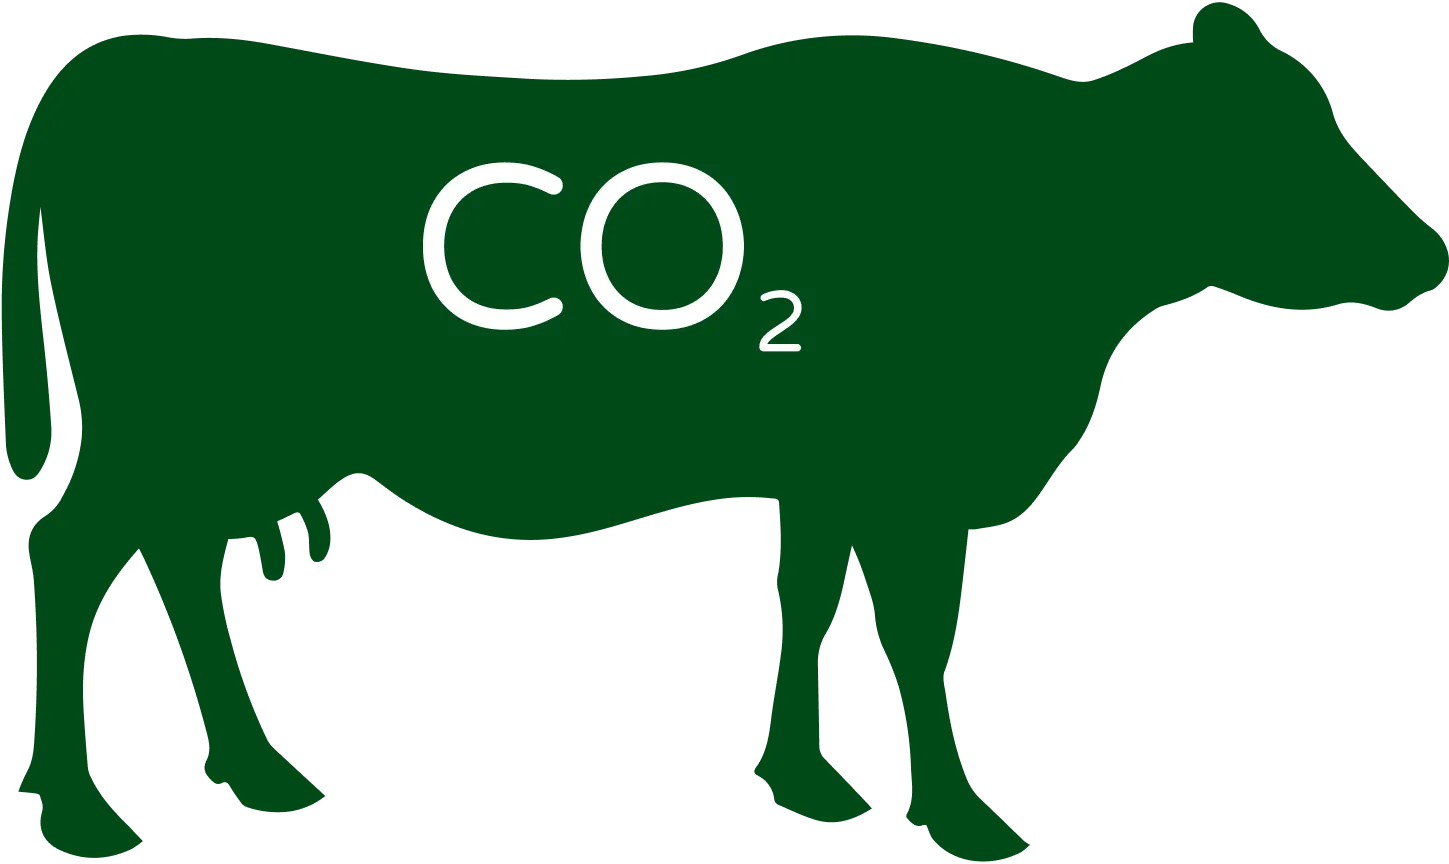 An image depicting the impact of meat eating on greenhouse gas emissions. The visual shows a cow with the letters "CO2" written on its body, symbolizing the significant contribution of livestock to greenhouse gas emissions. The image highlights the link between meat consumption and environmental degradation, particularly in relation to climate change.